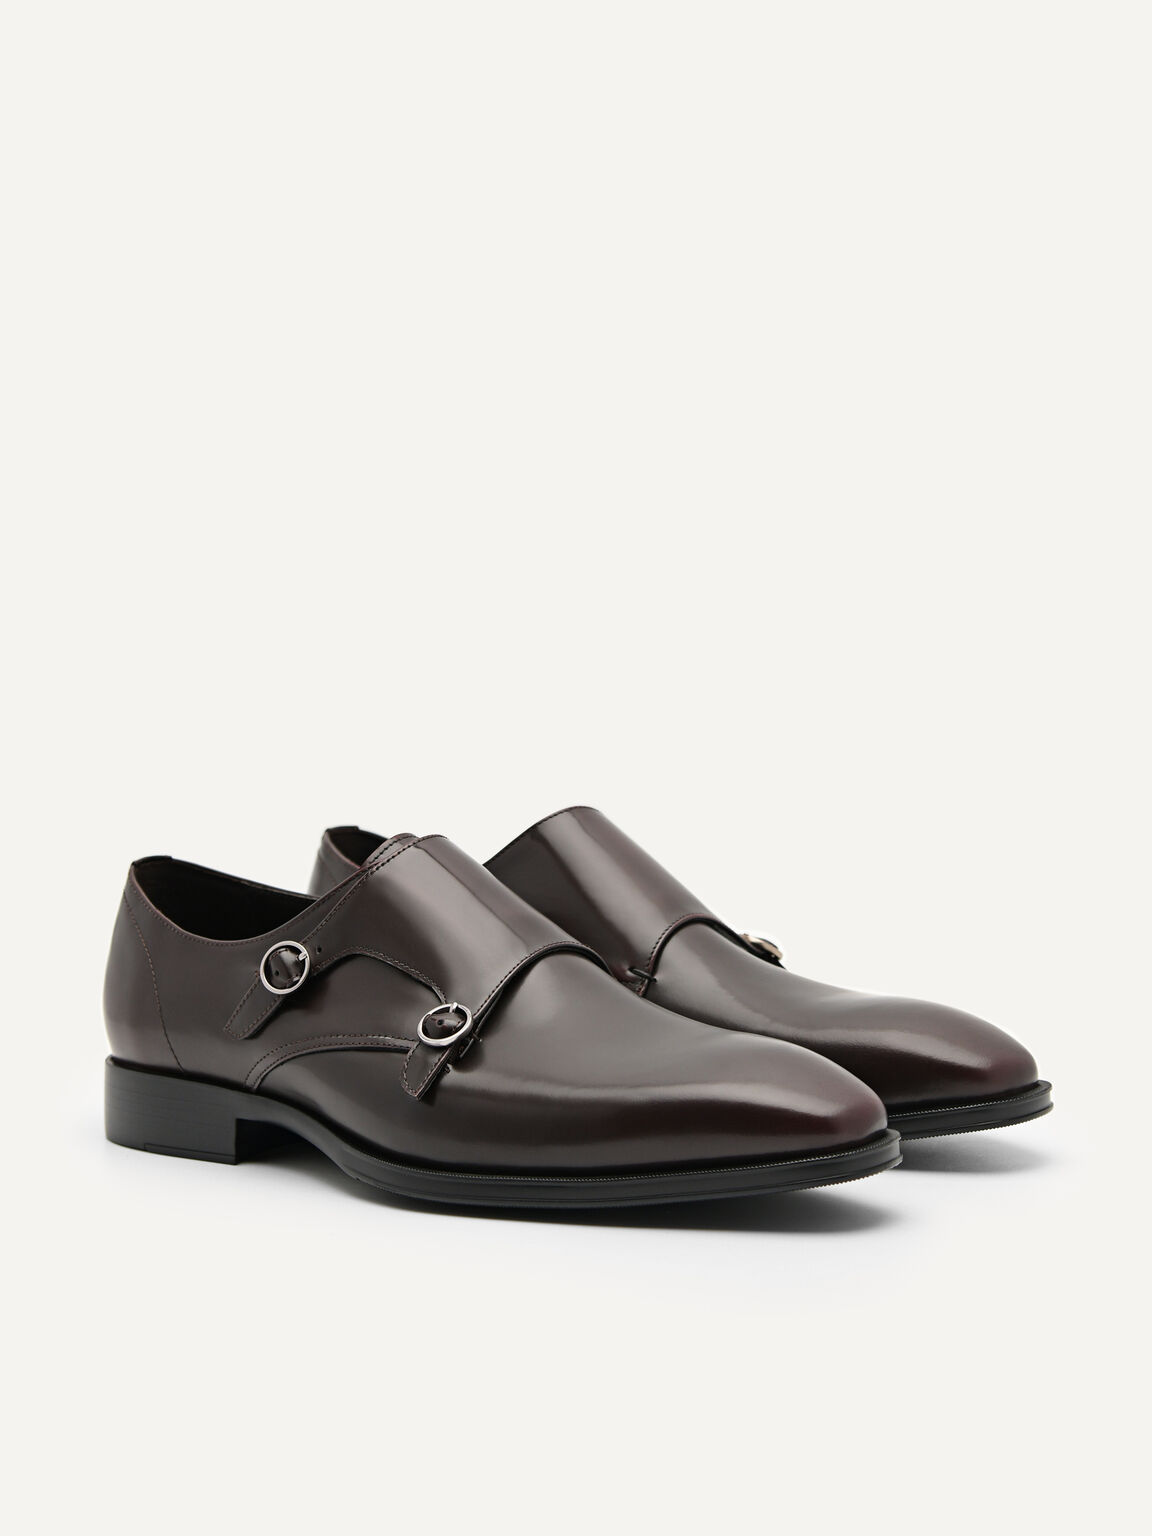 Holly Leather Double Monkstrap Shoes, Maroon